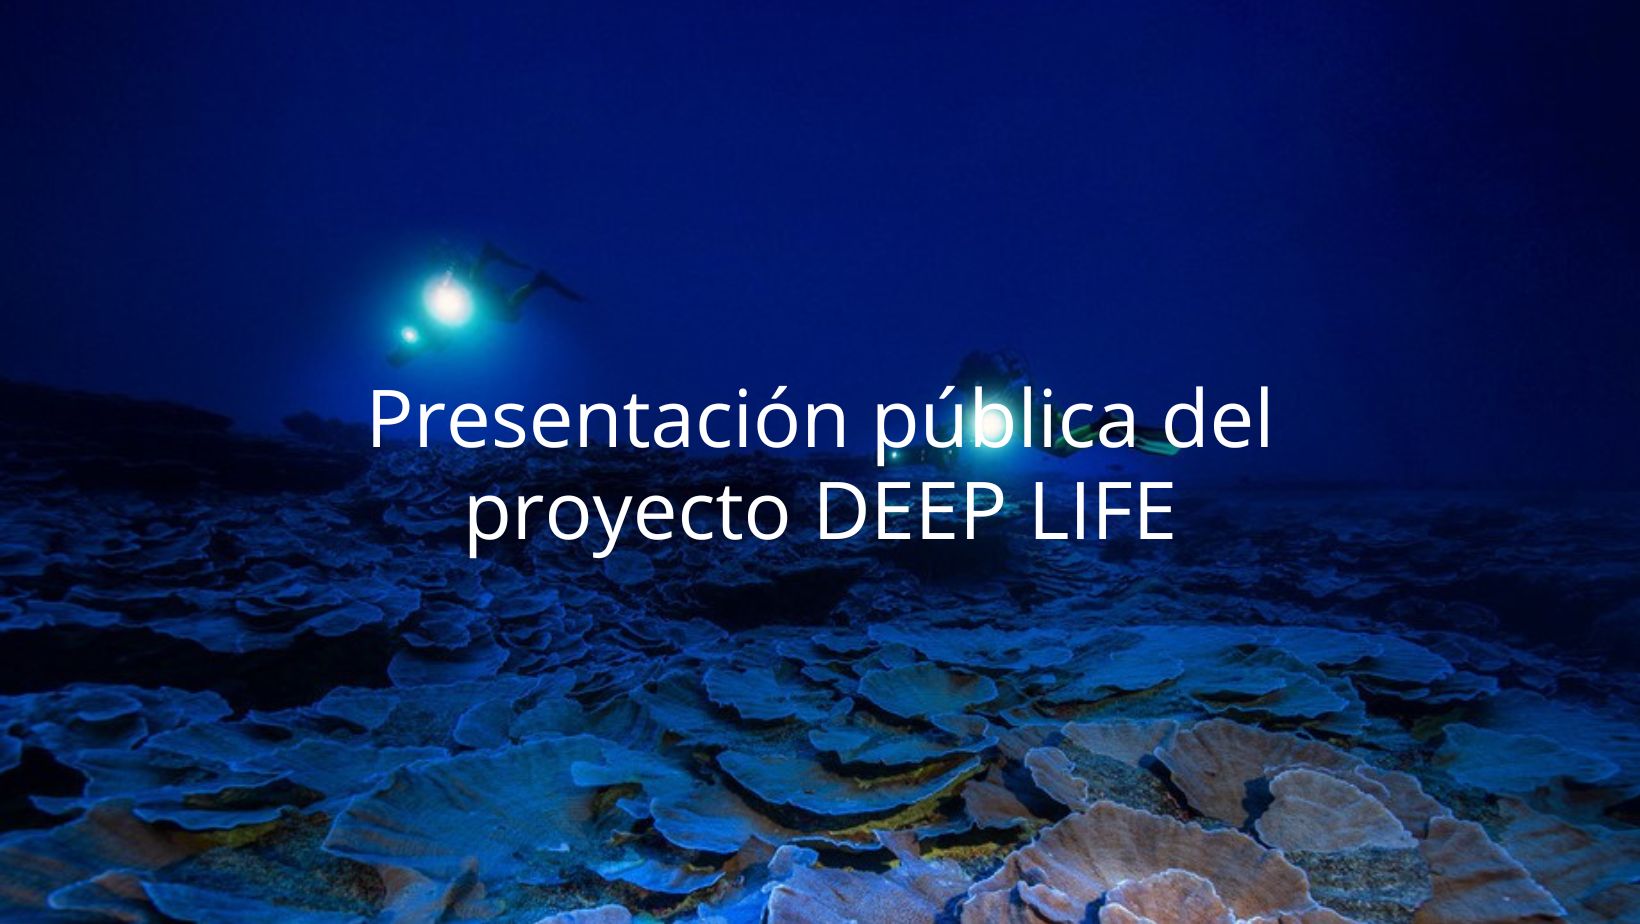 Public presentation of the DEEP LIFE project